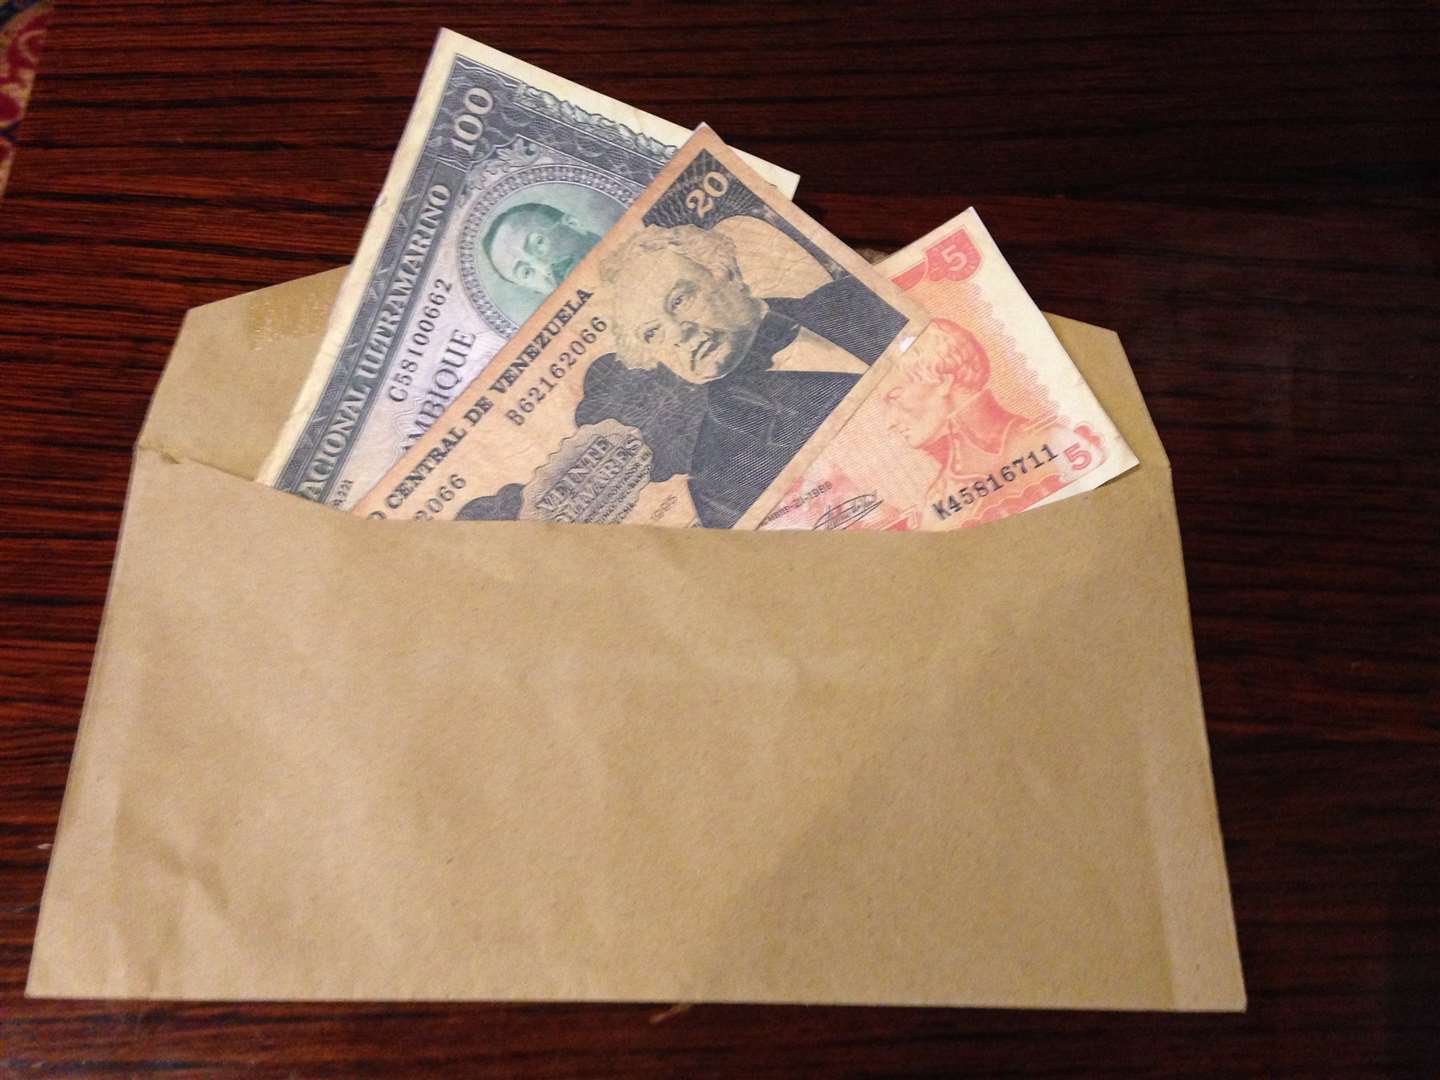 Brown envelopes with foreign currency was posted through letter boxes of town councillors